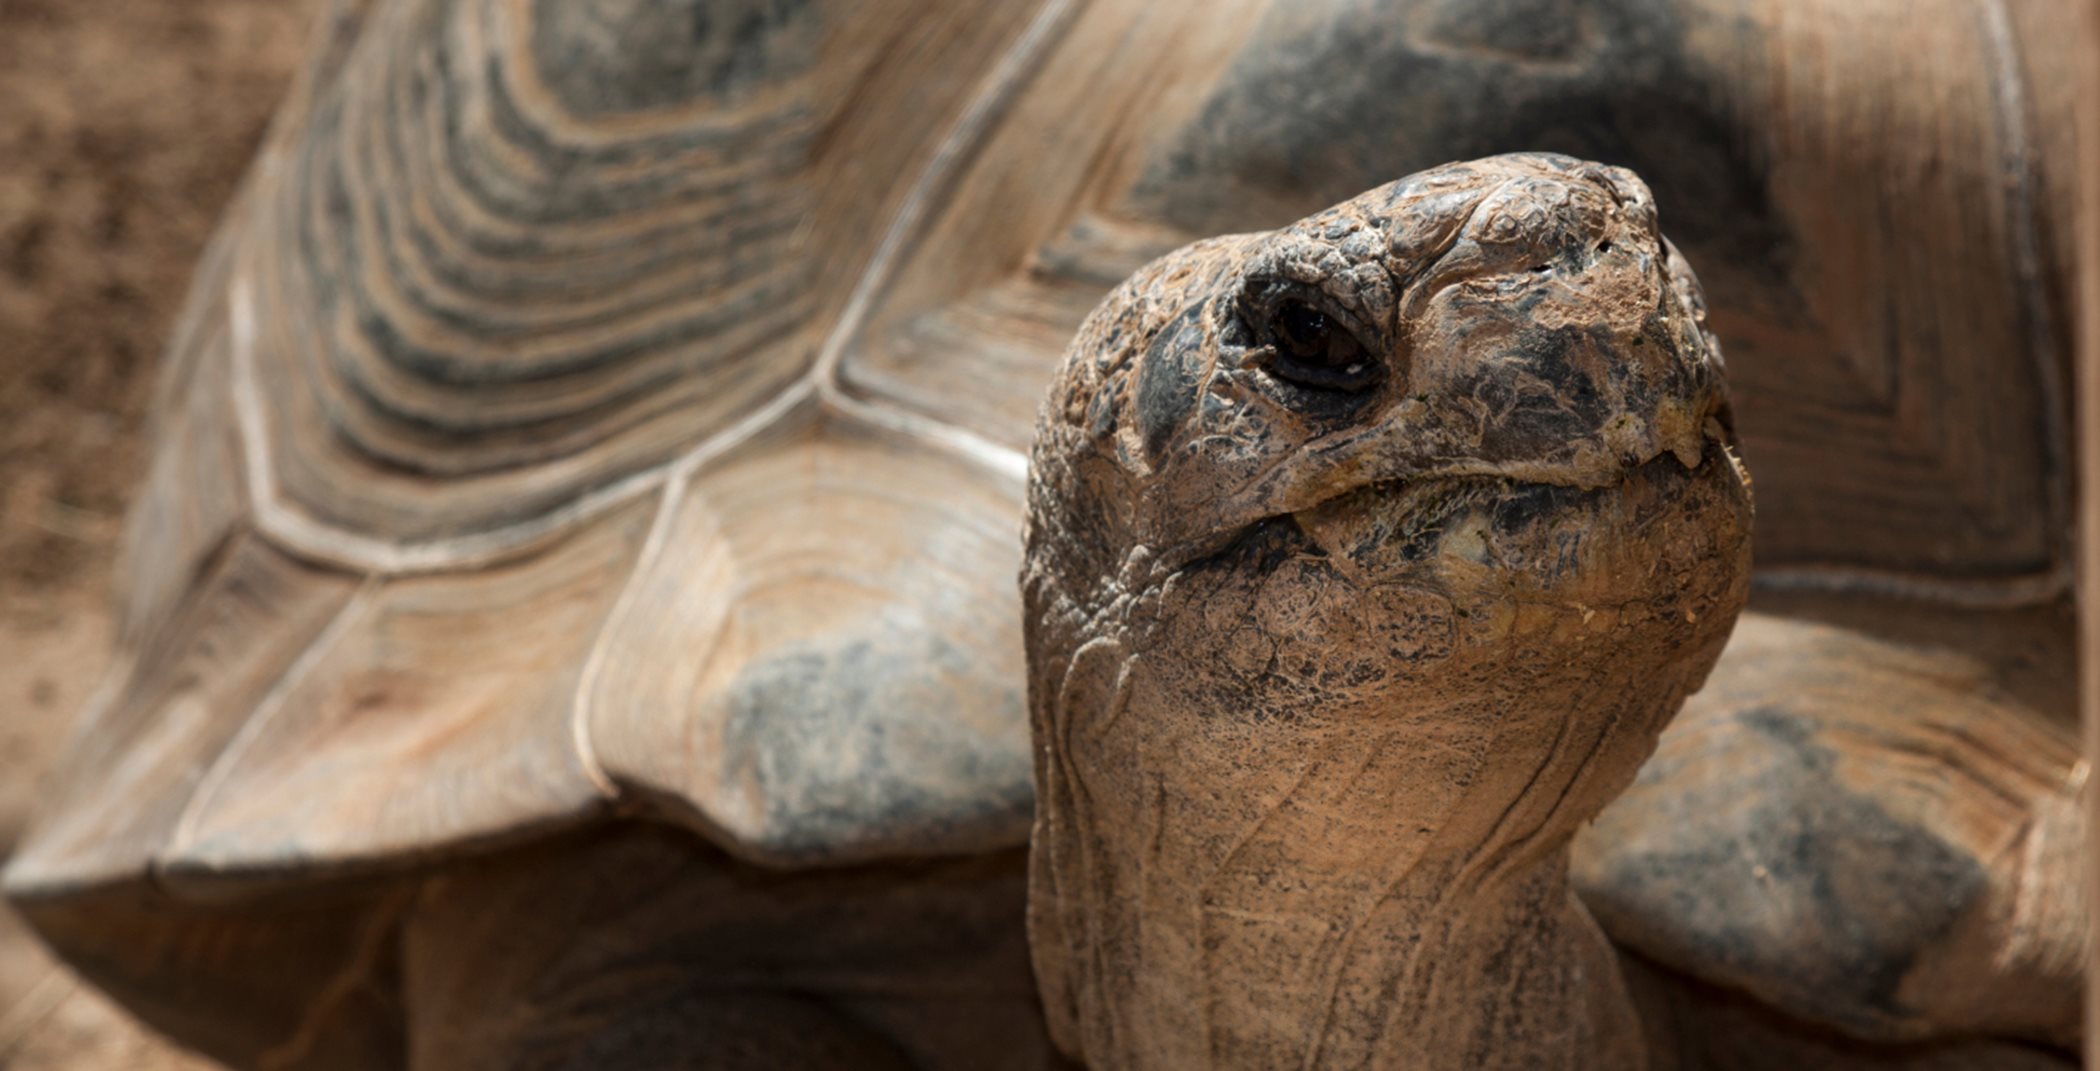 close up of a tortoise